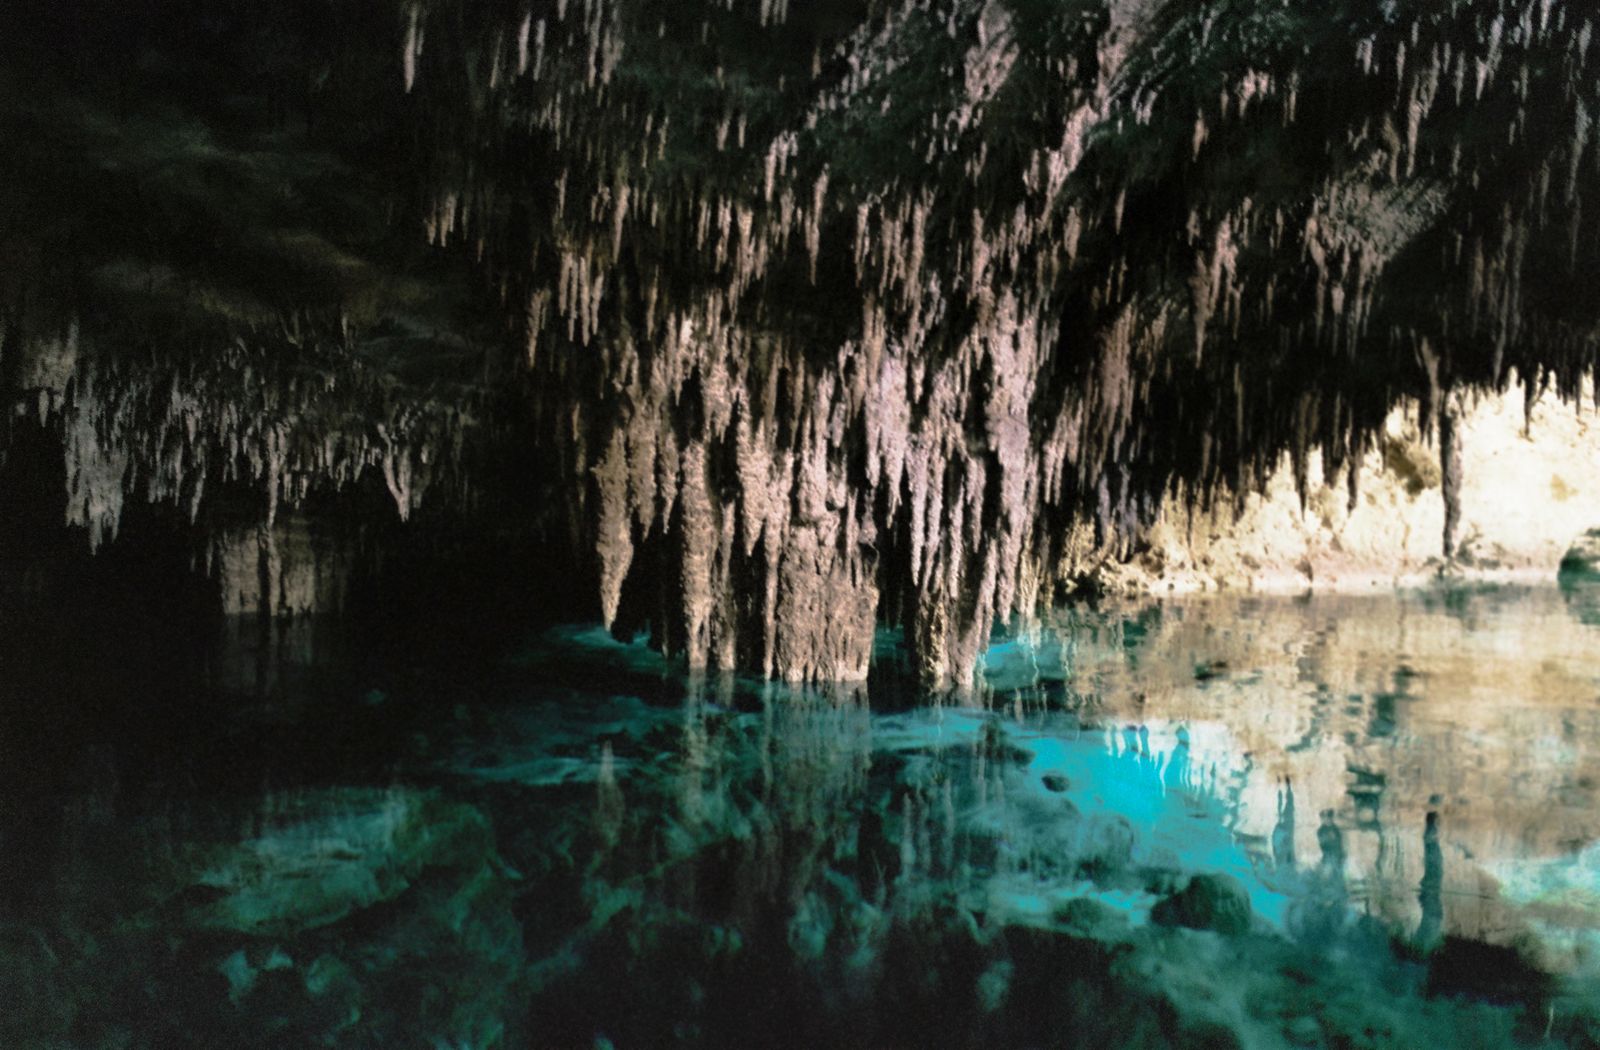 © Takako Noel - Image from the Cenote angels photography project